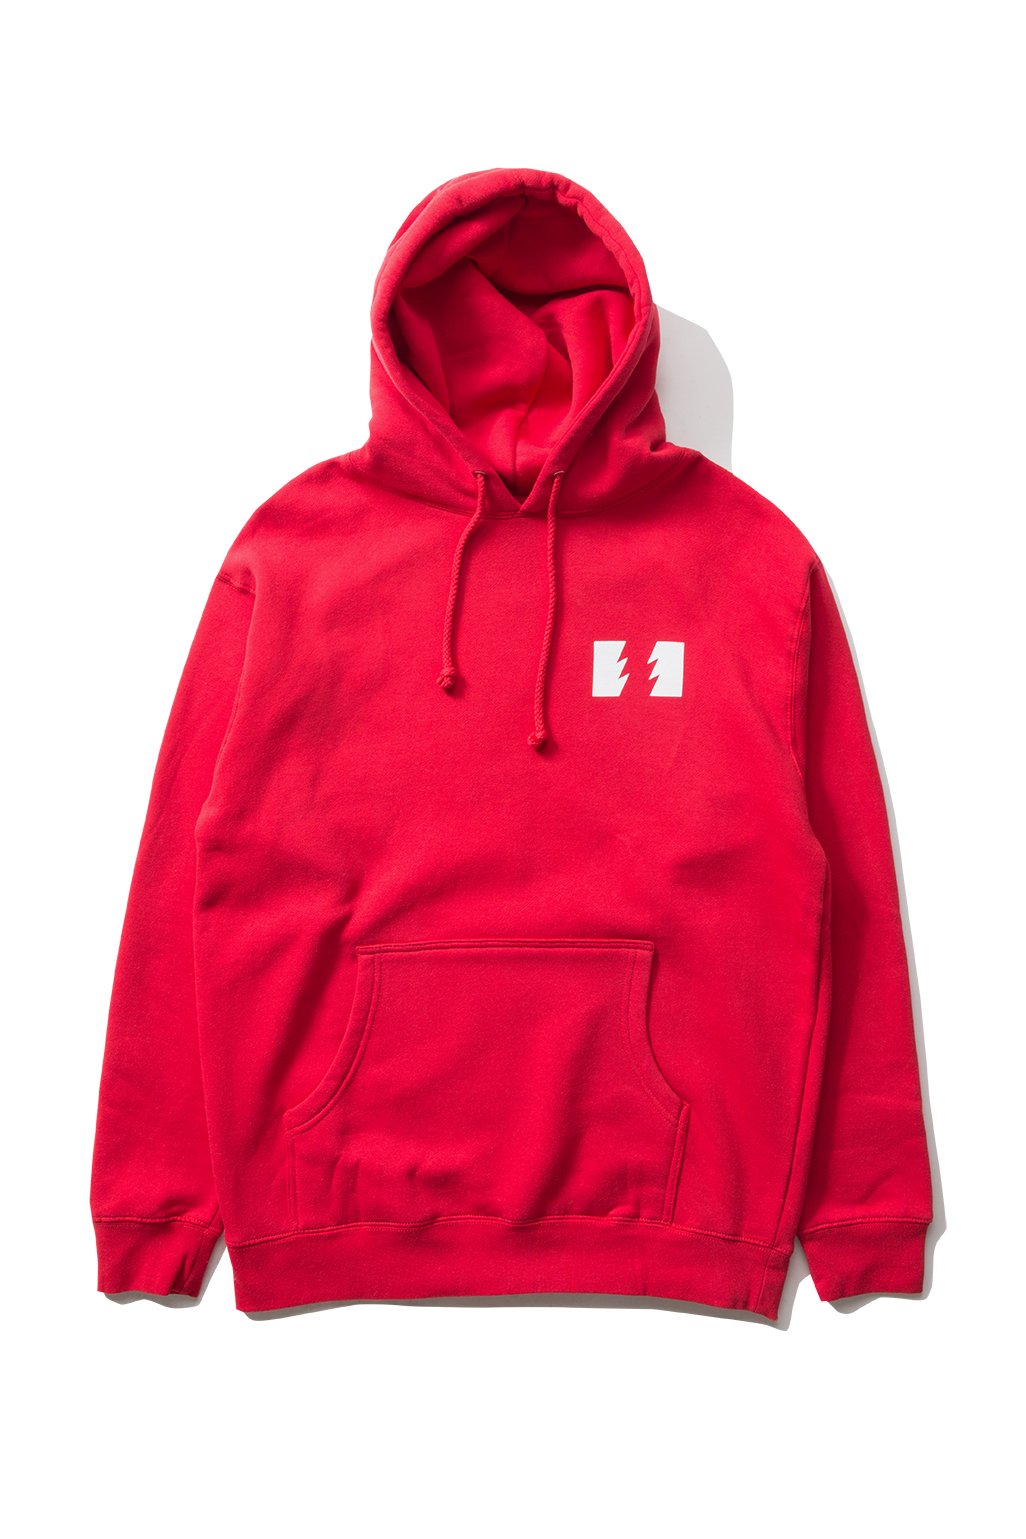 The Hundreds Forever Wildfire Pullover Hoodie | eBay